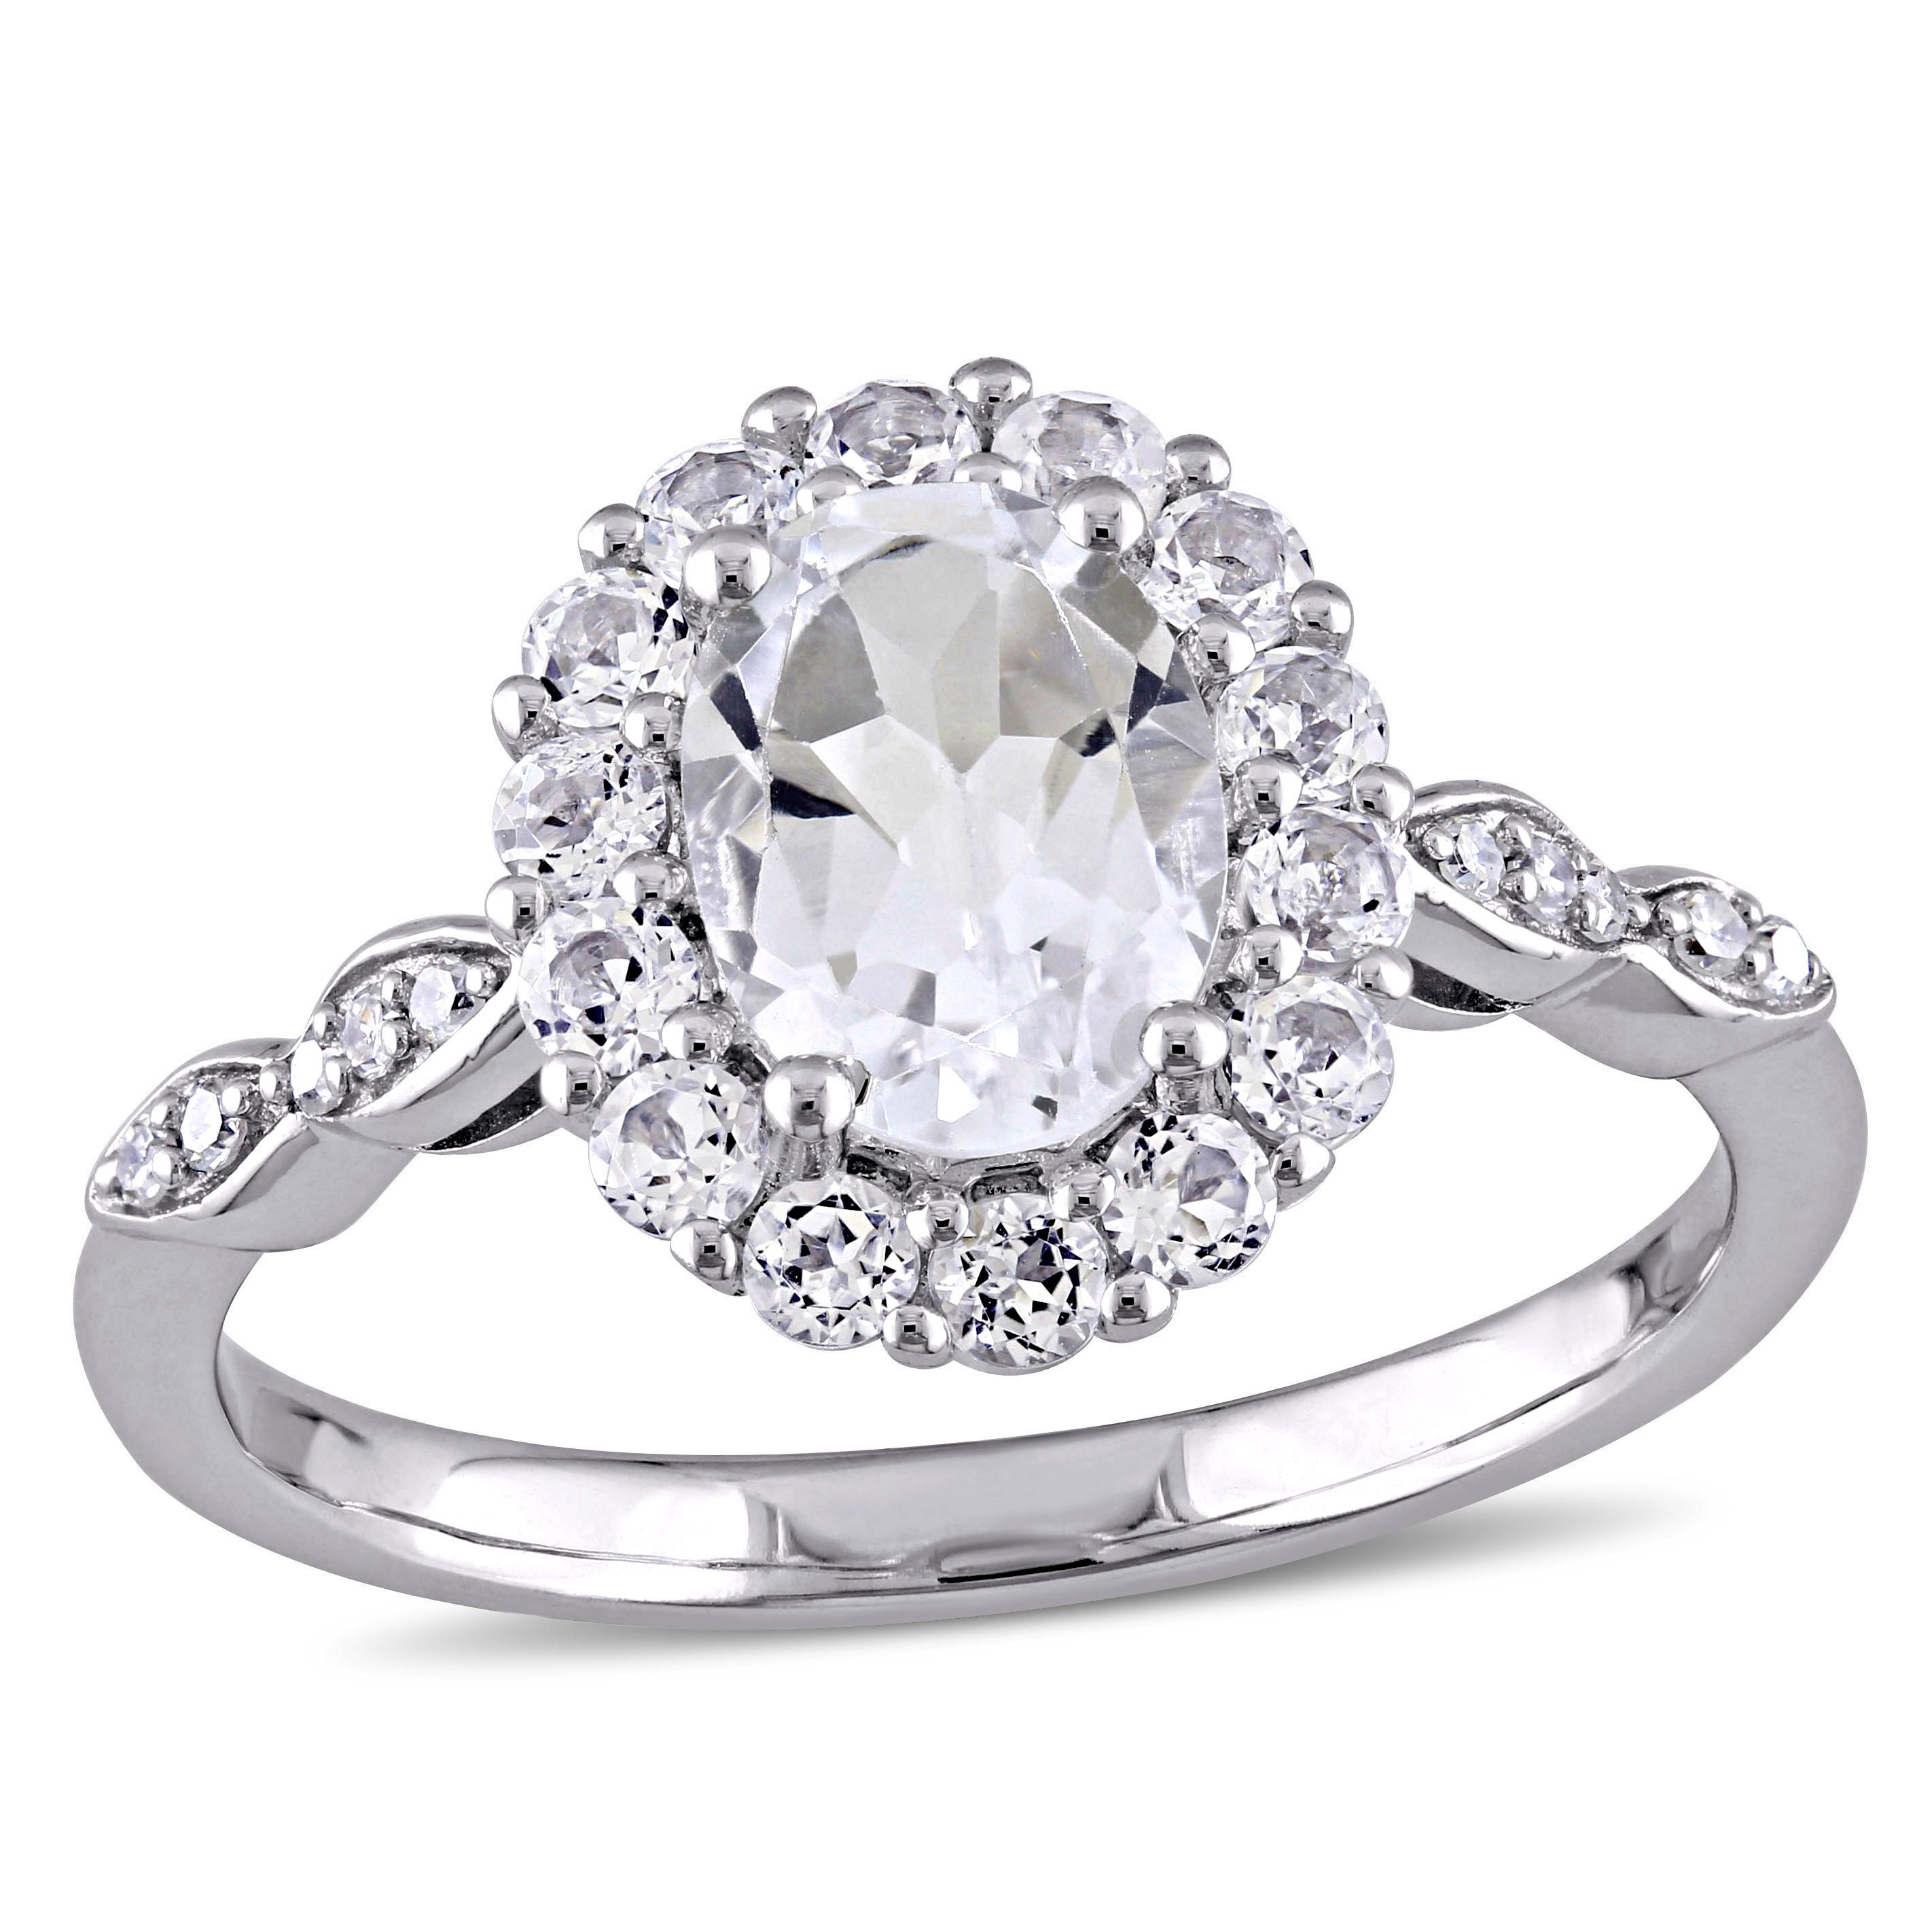 White Topaz and Diamond Accent Vintage Ring in 14k White Gold